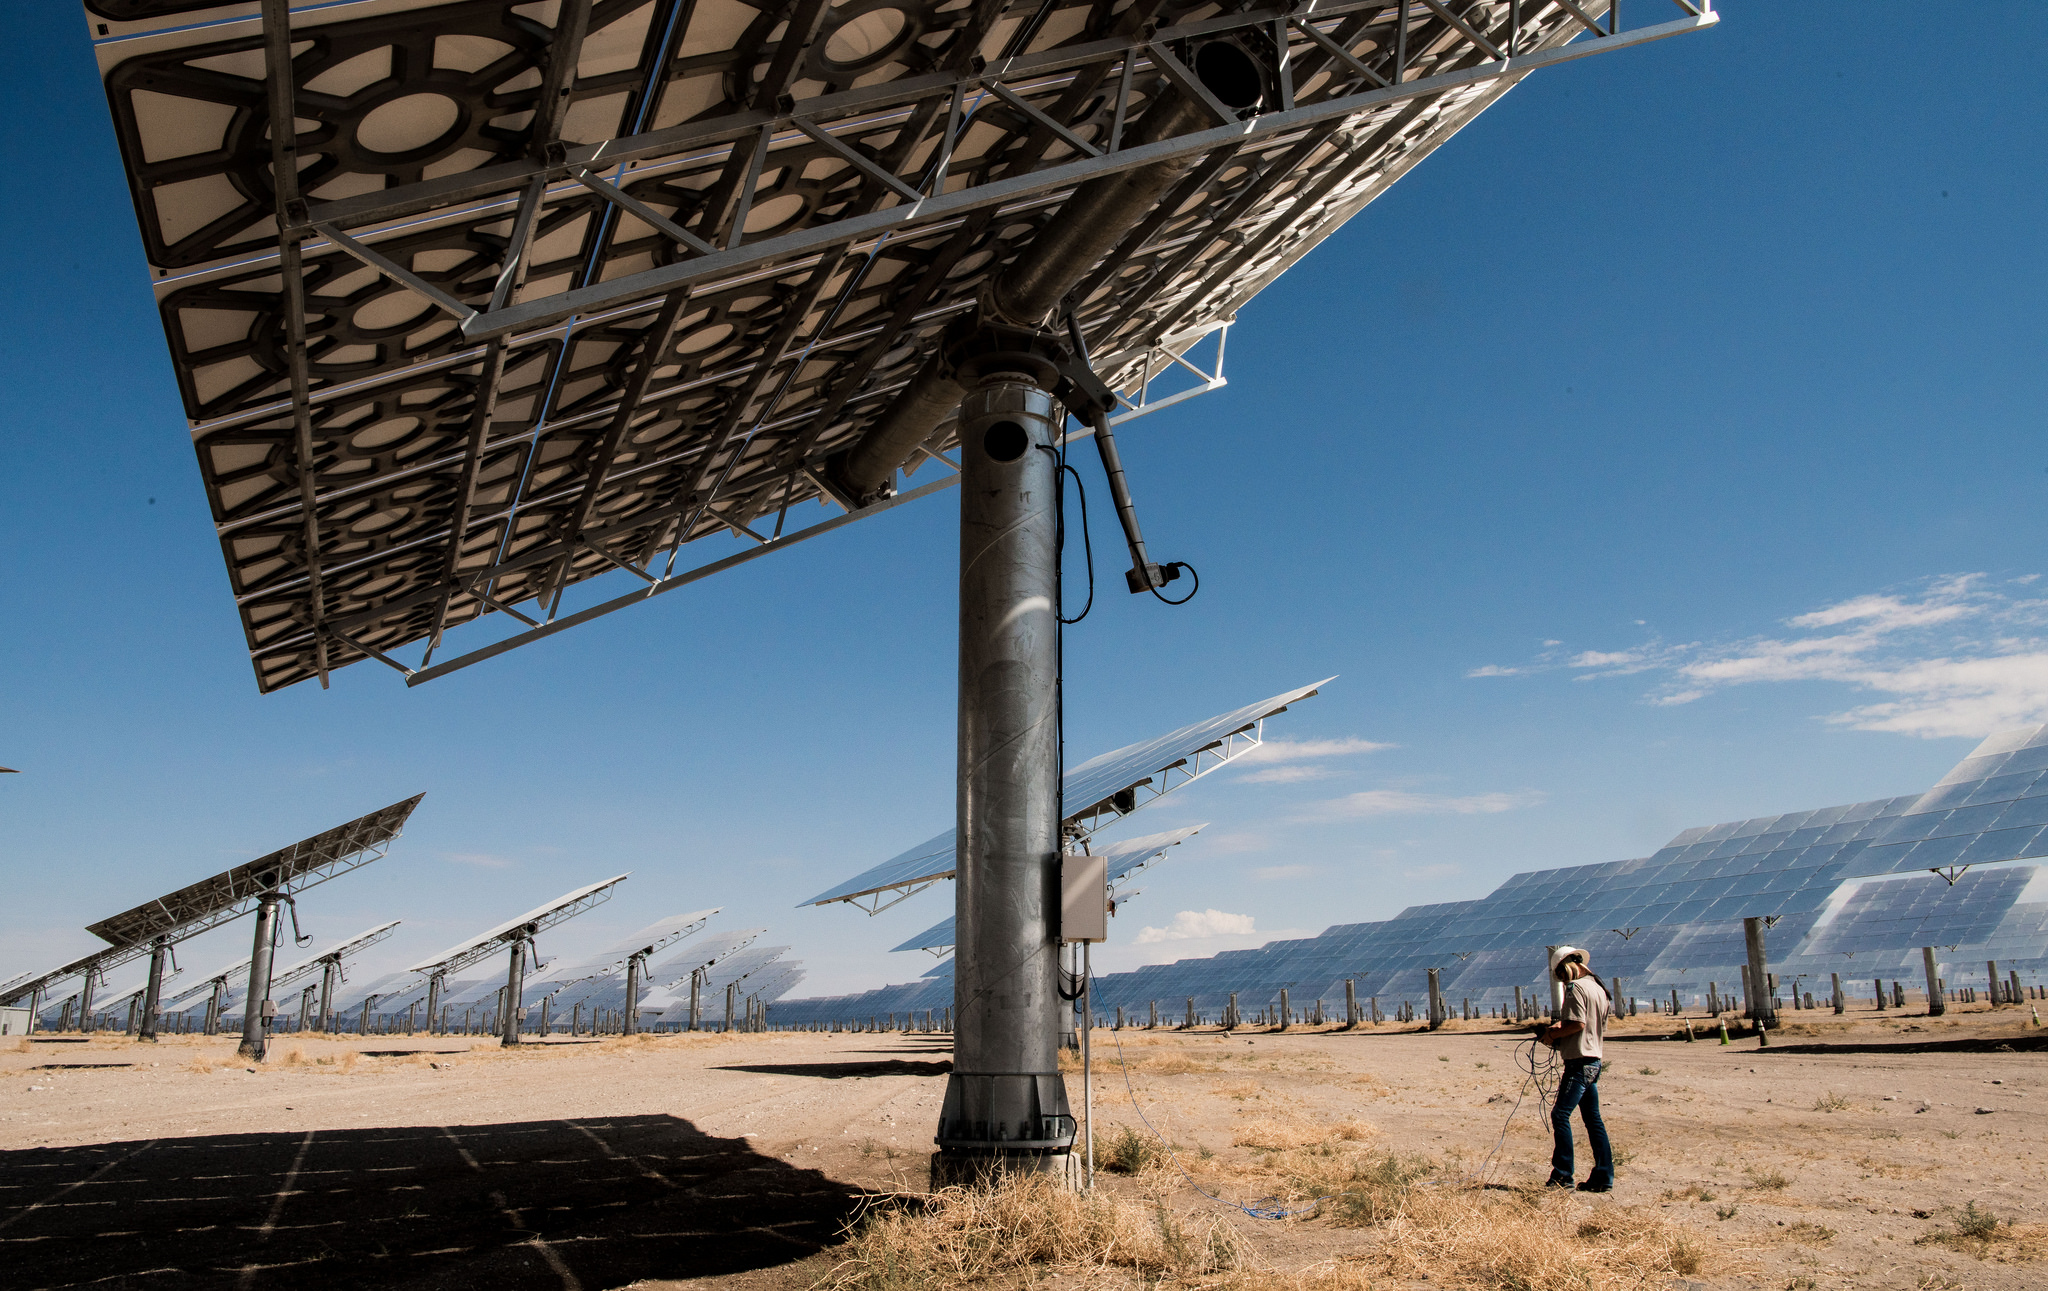 A solar thermal plant in Nevada